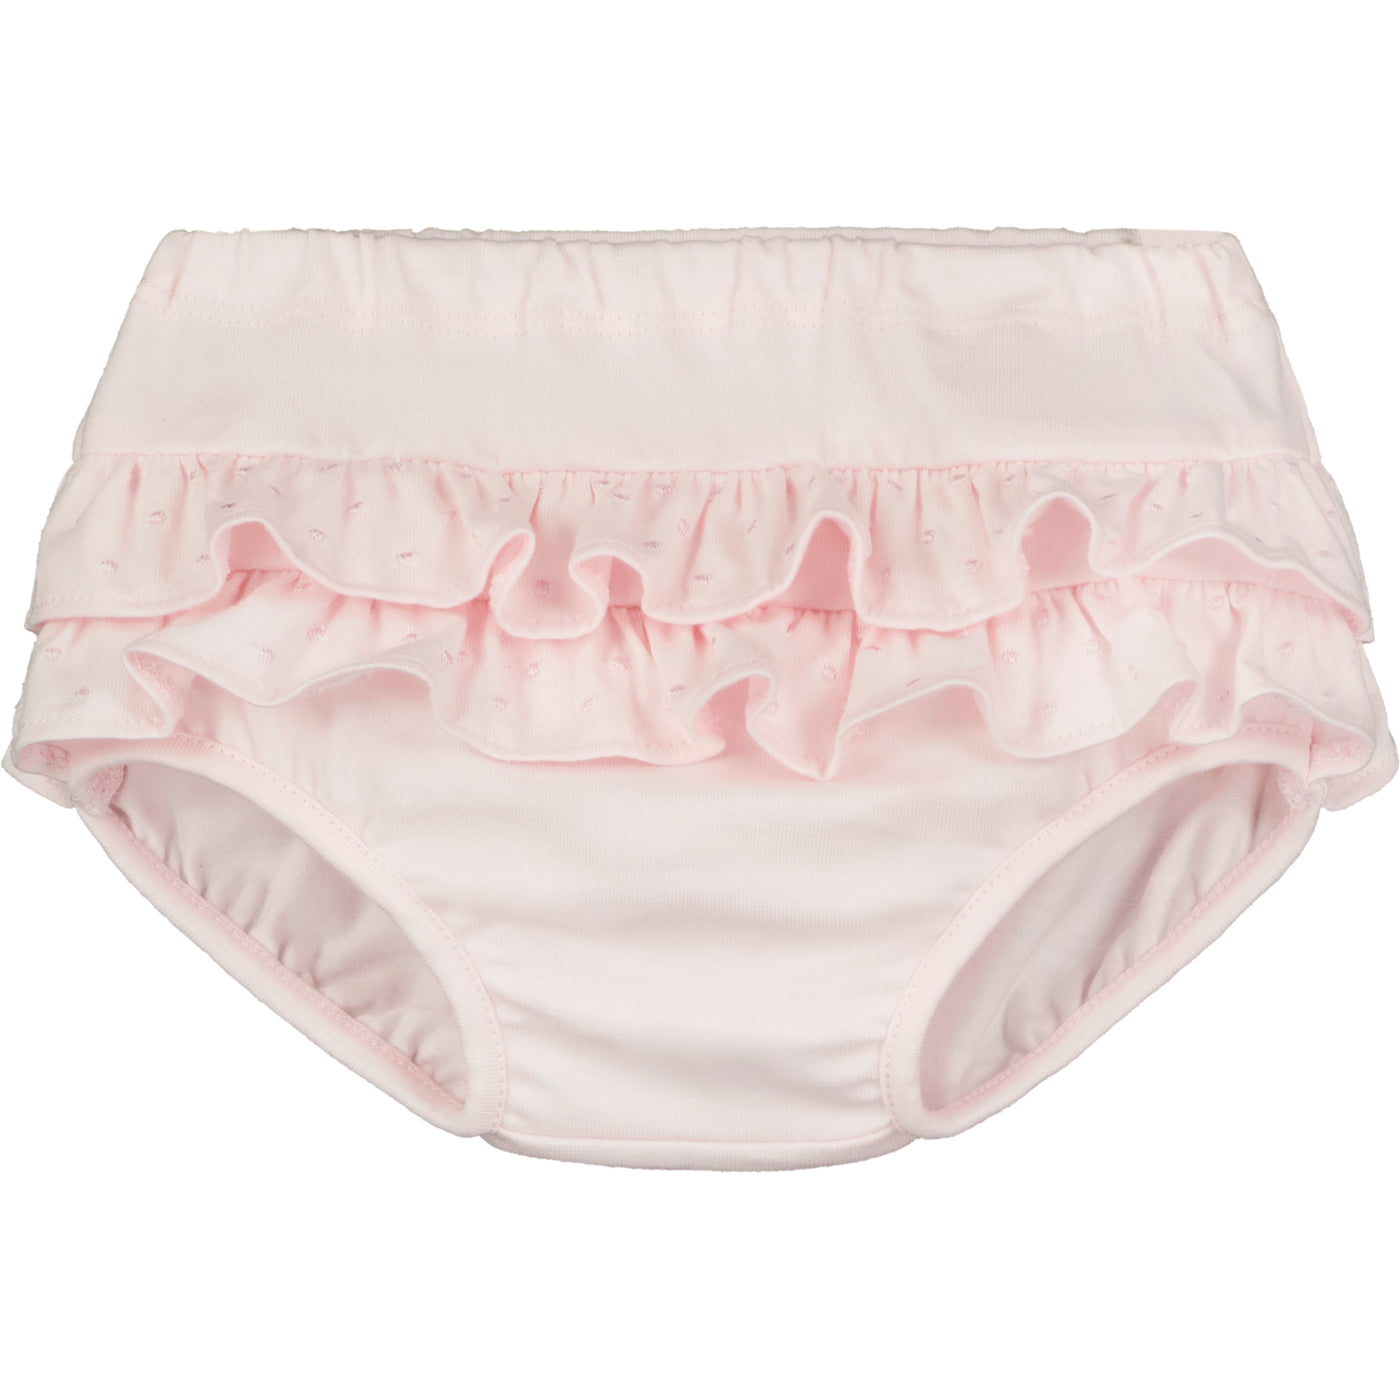 Flossie Pink Frilly Baby Girls Pants